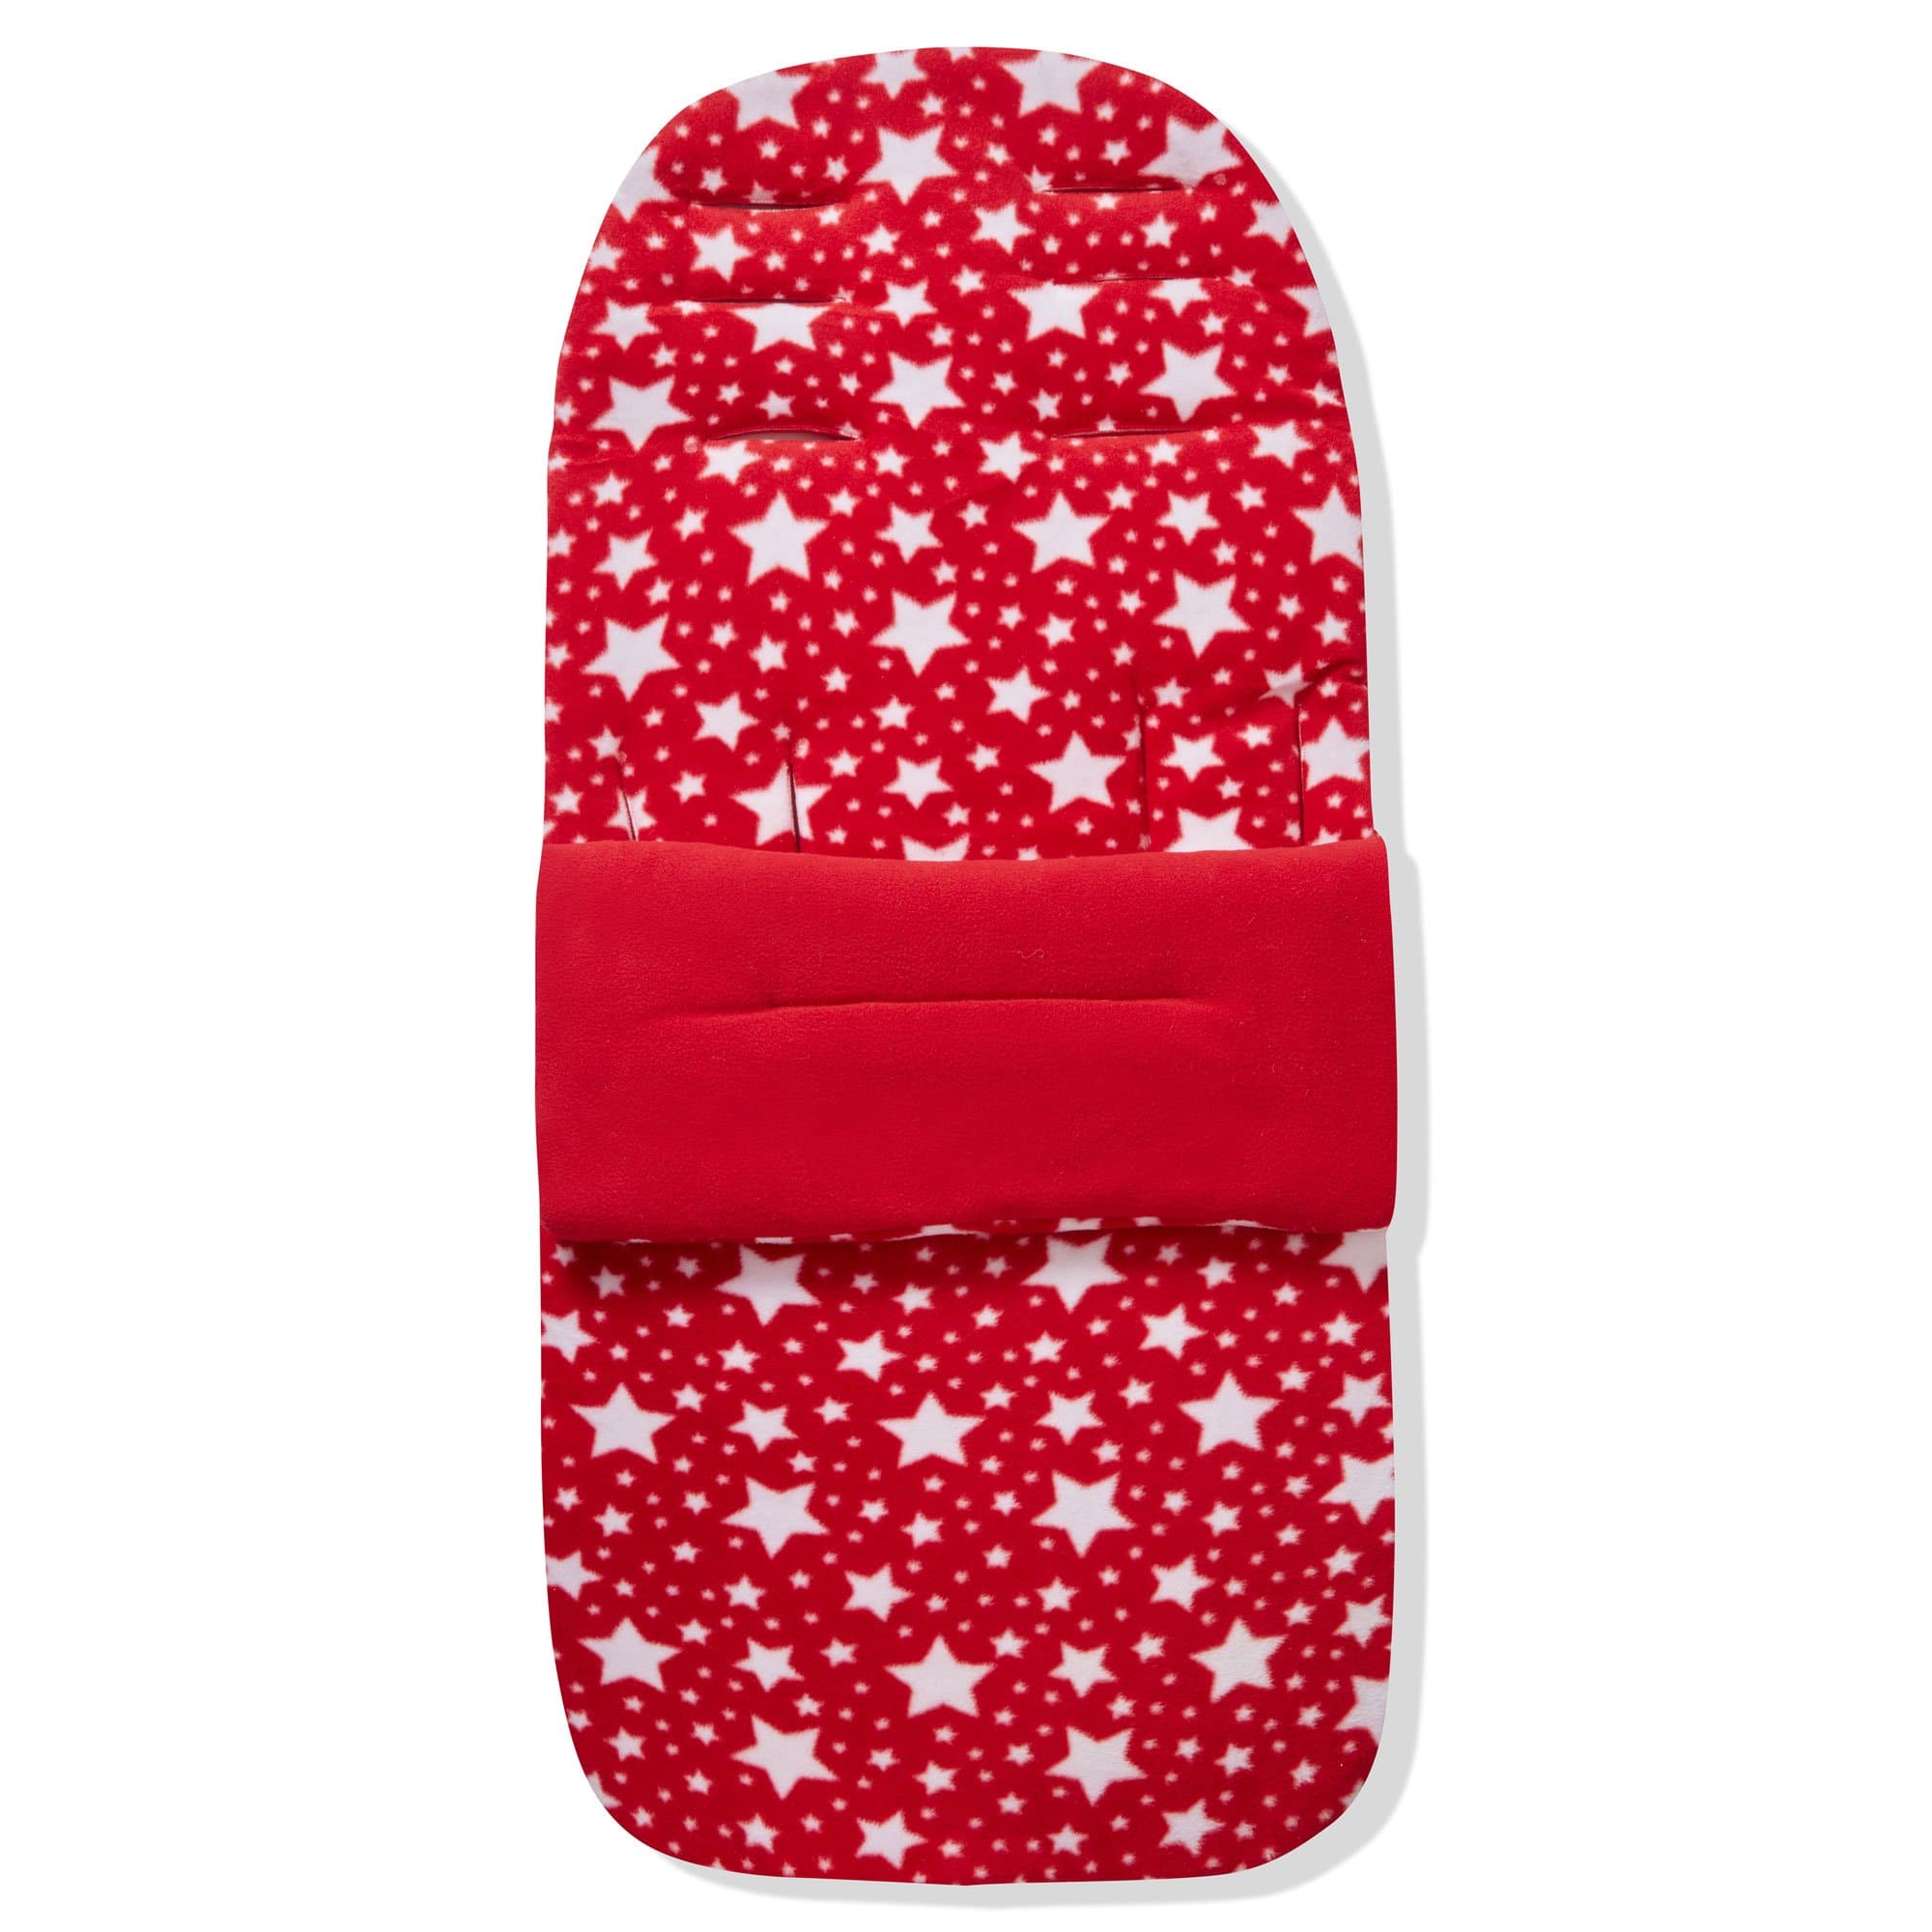 Fleece Footmuff / Cosy Toes Compatible with Valco - For Your Little One